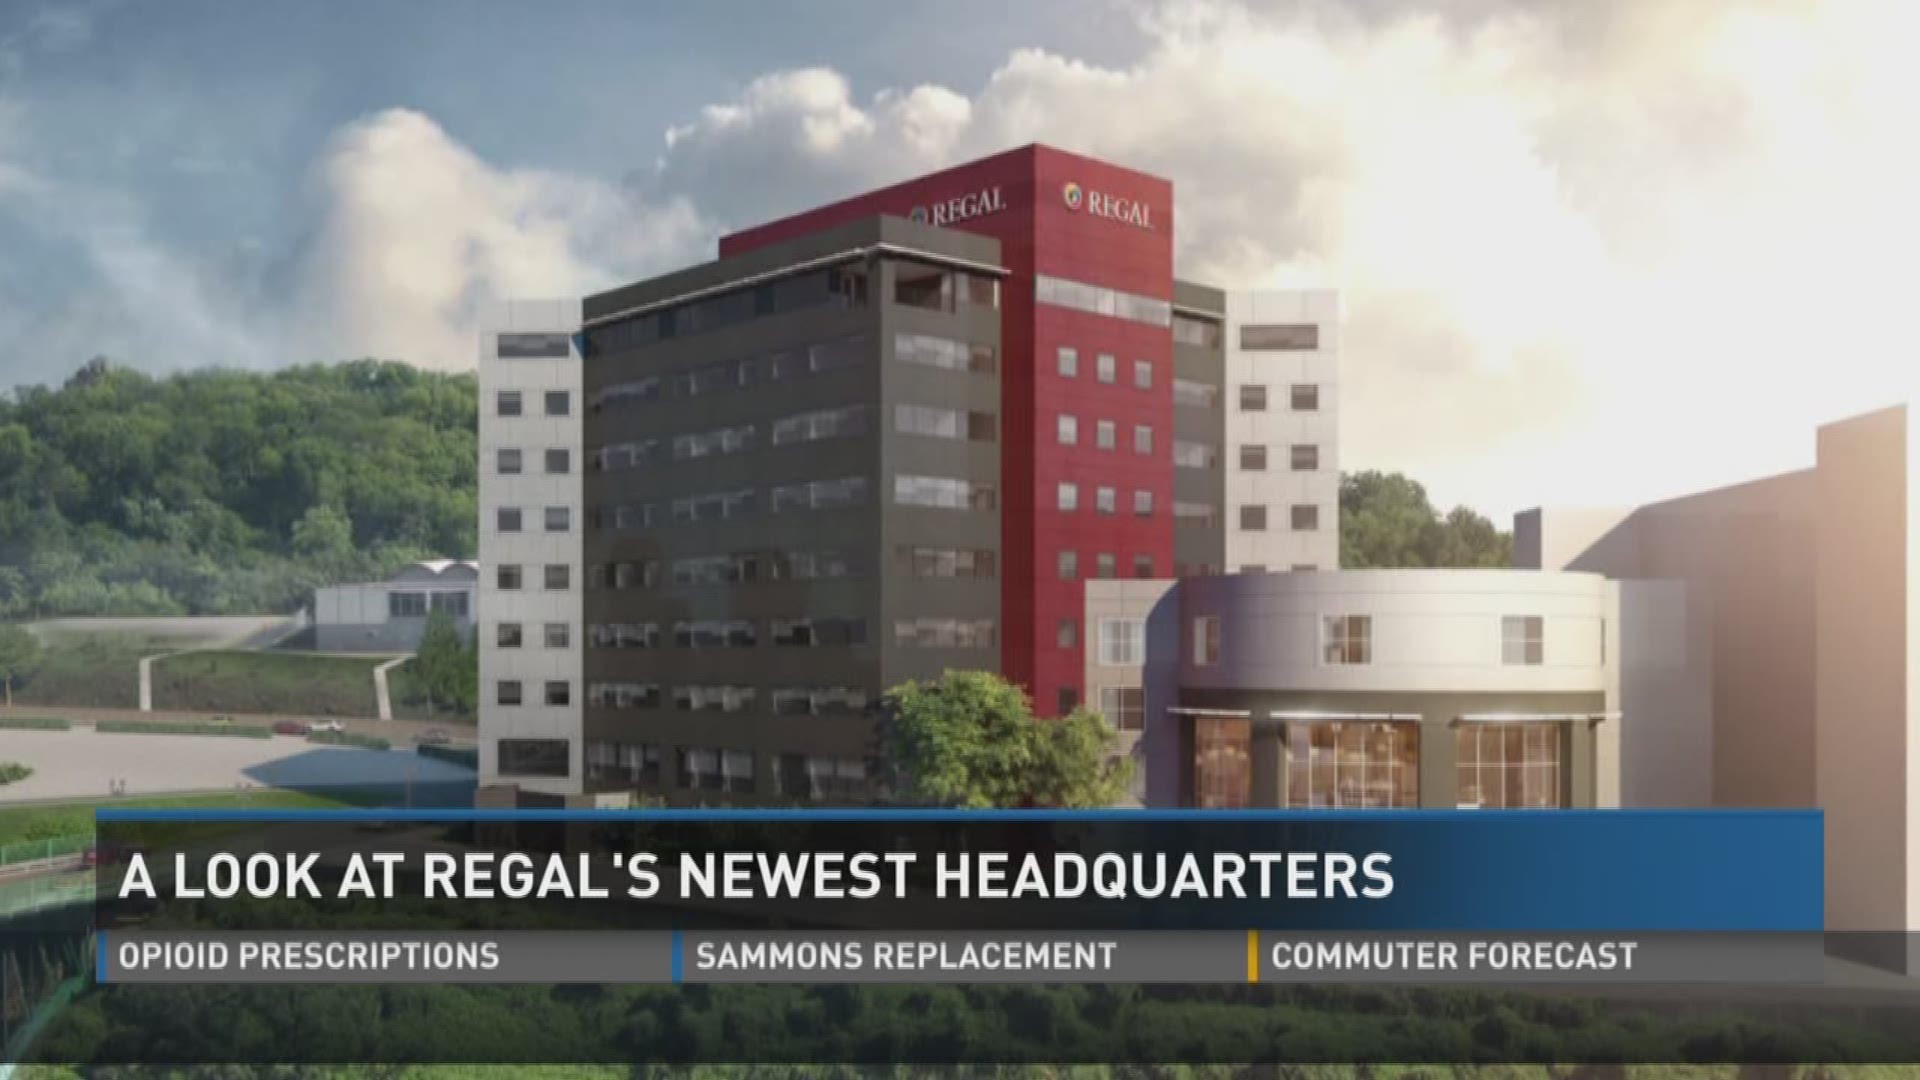 The new development by Regal Entertainment Group will include more than 300 apartments for student and families, a river walk and a public event plaza. Construction is projected to take a while, but some apartment are expected to open in 2017.